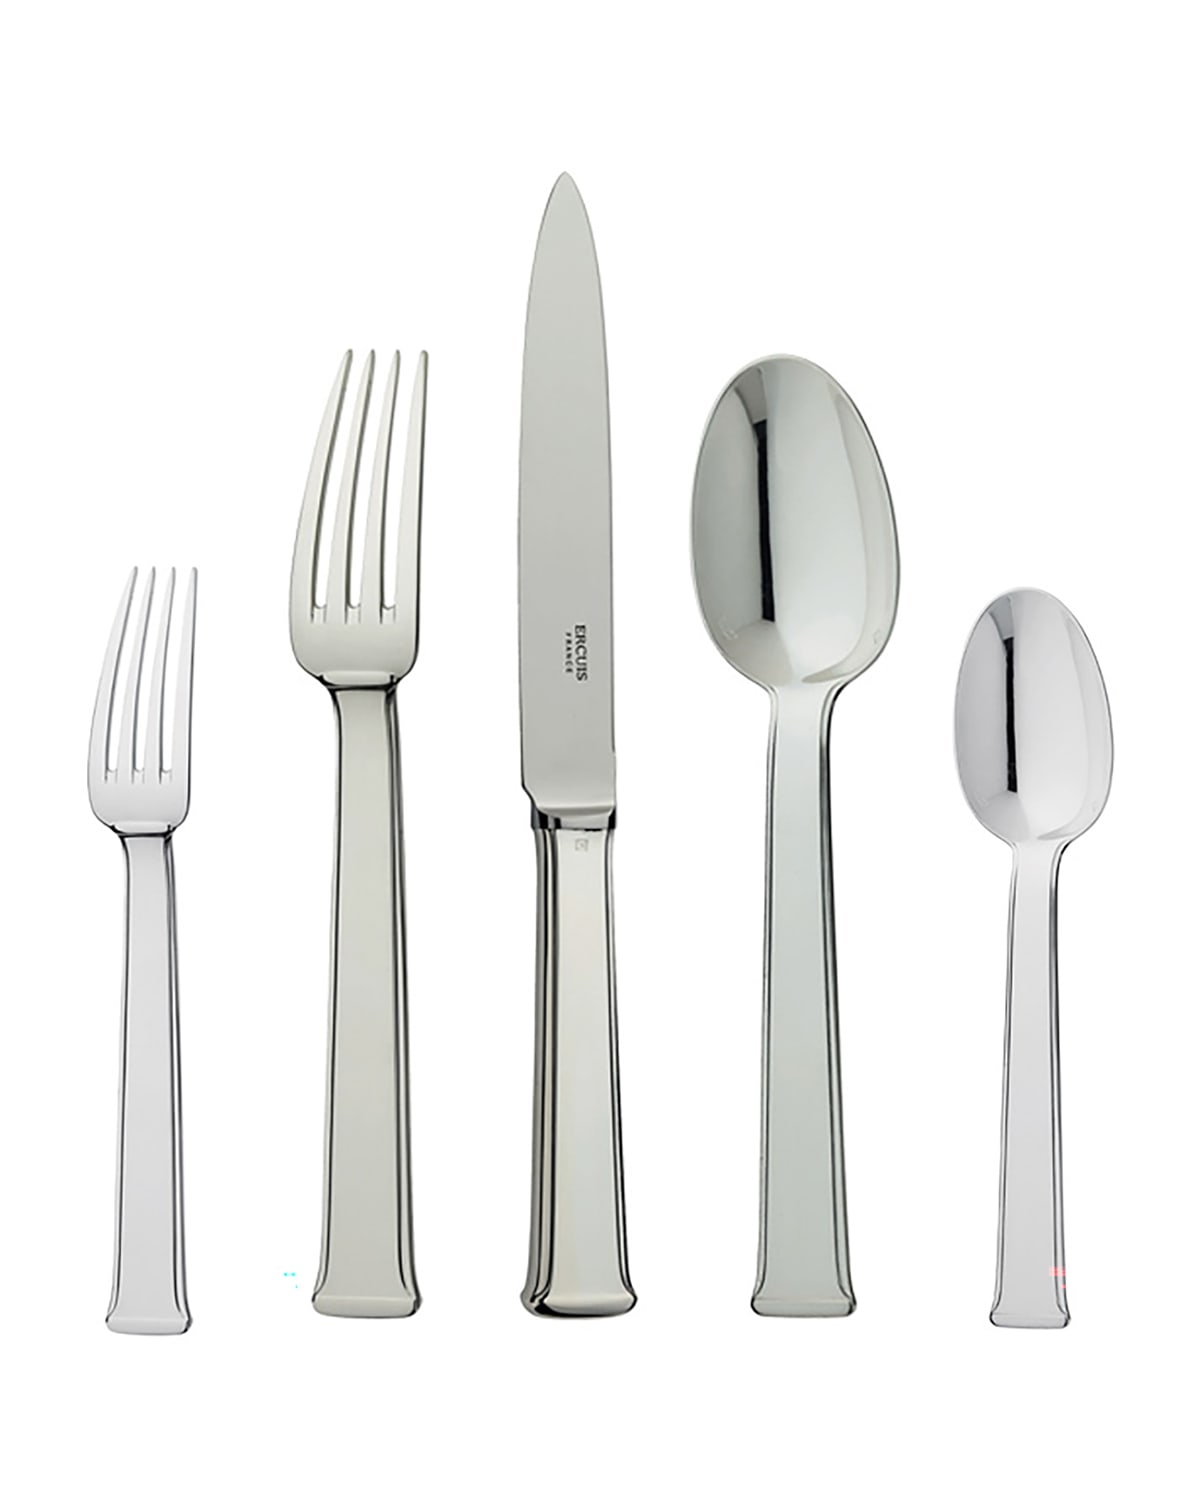 Ercuis Sequoia 5-piece Stainless Steel Flatware Place Setting